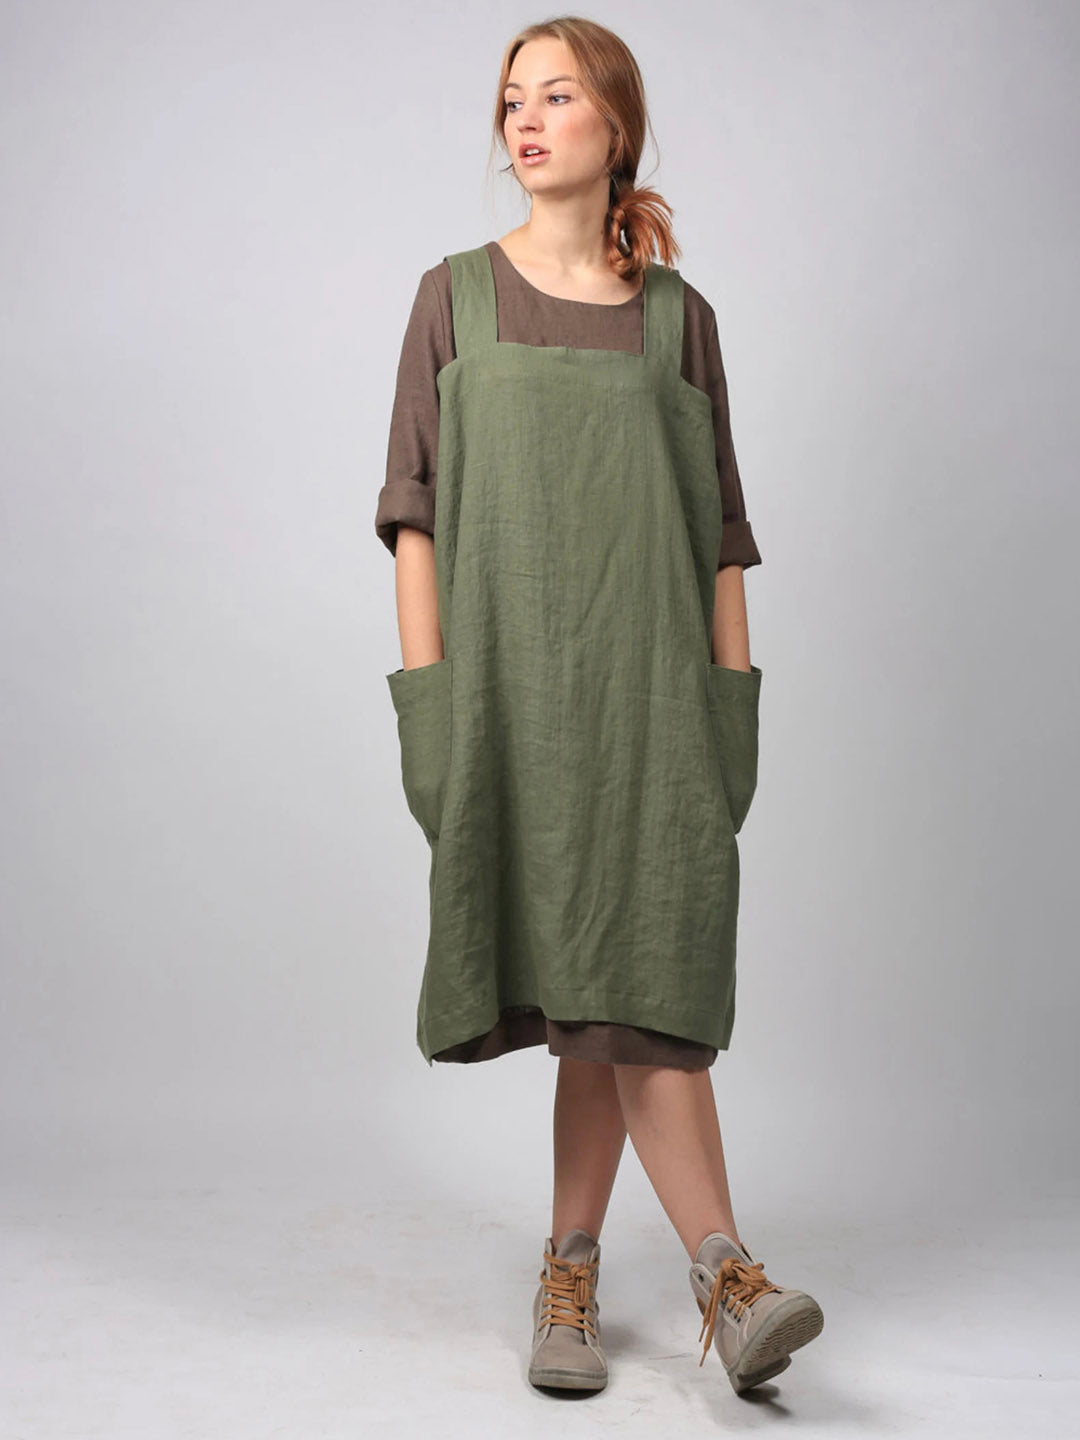 Square Cross Cotton and Linen Pinafore Apron with Deep Pockets